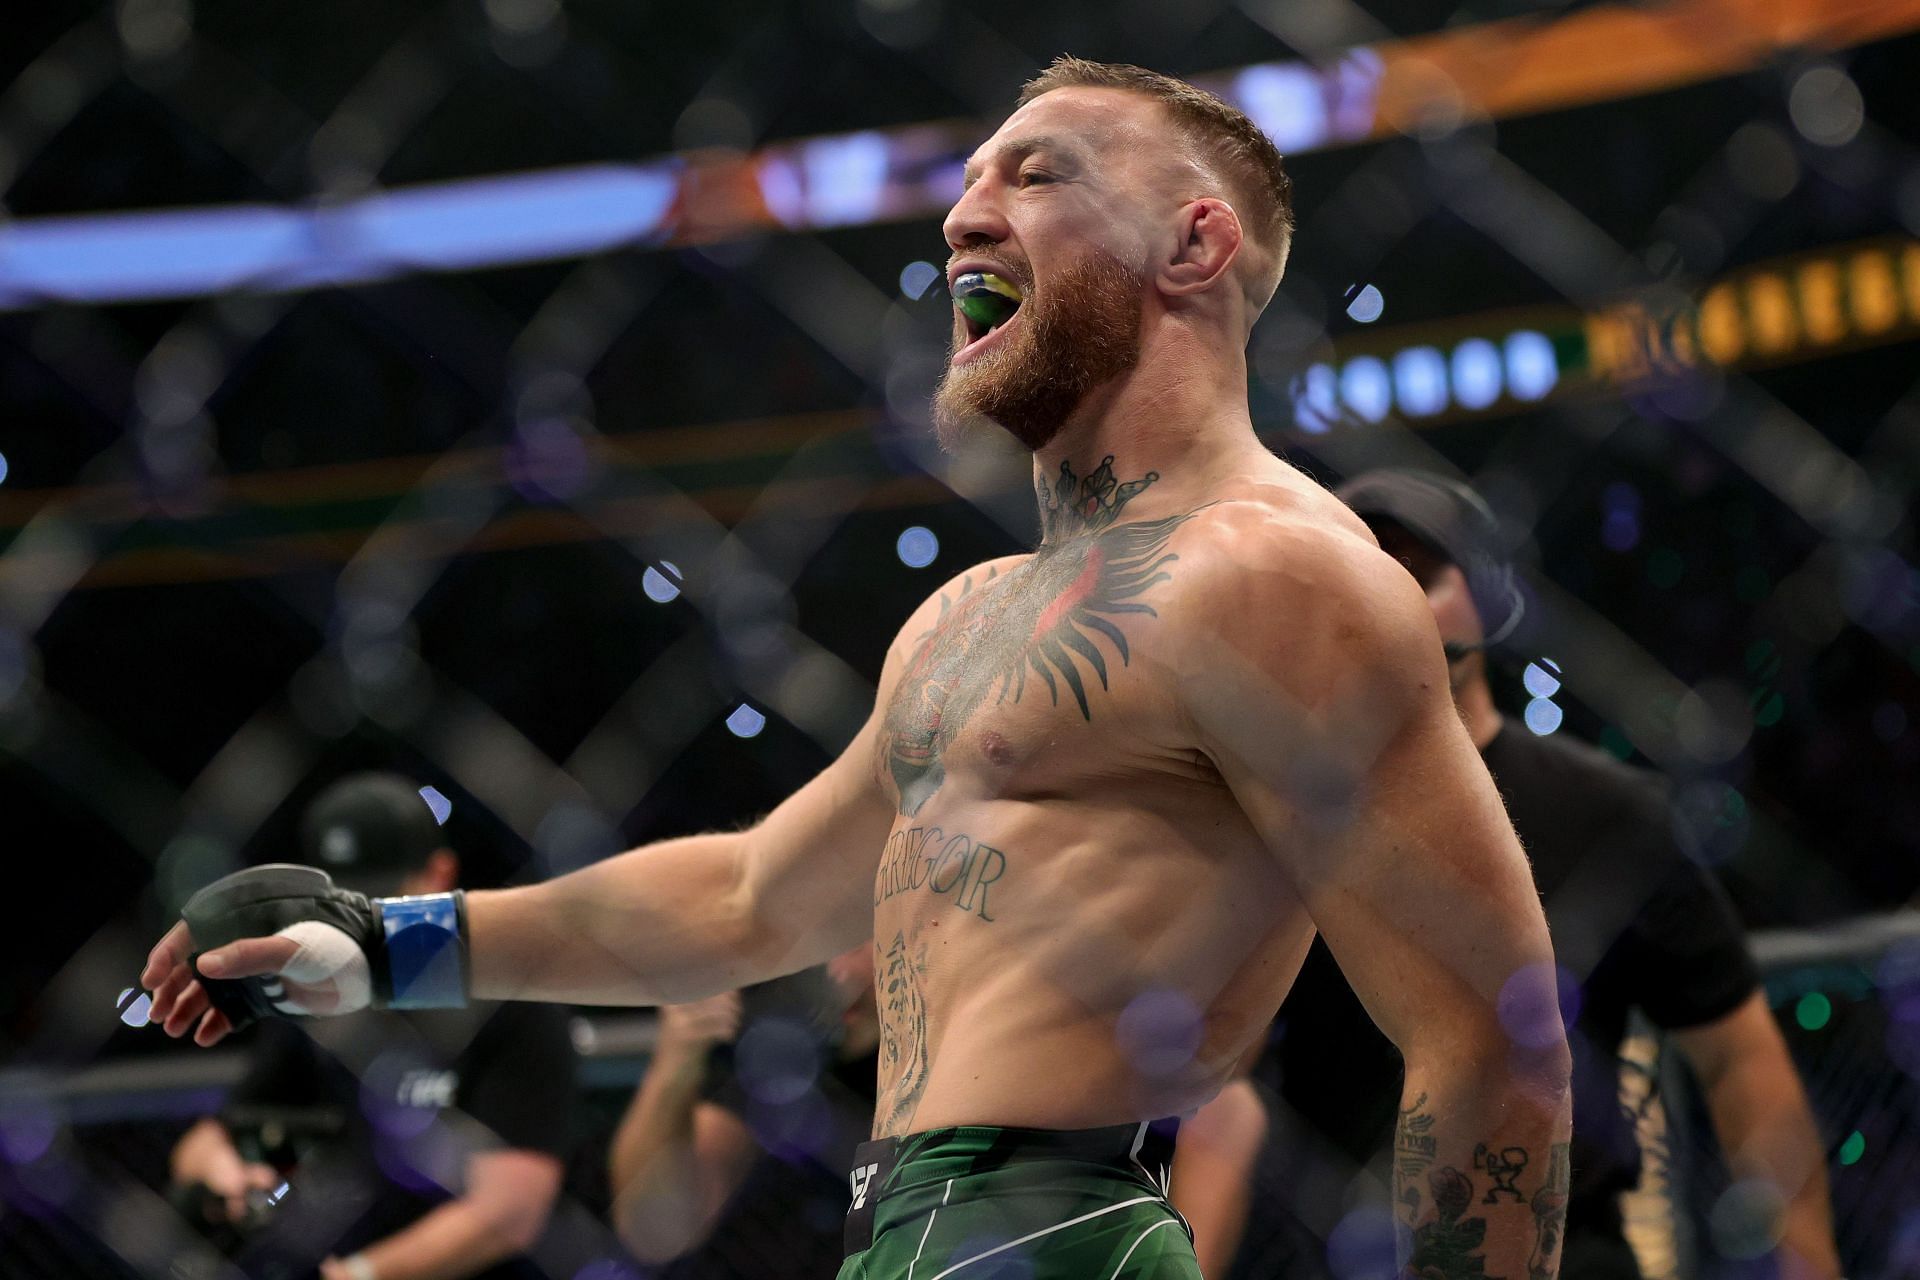 McGregor and Masvidal have a combined record of 57-22